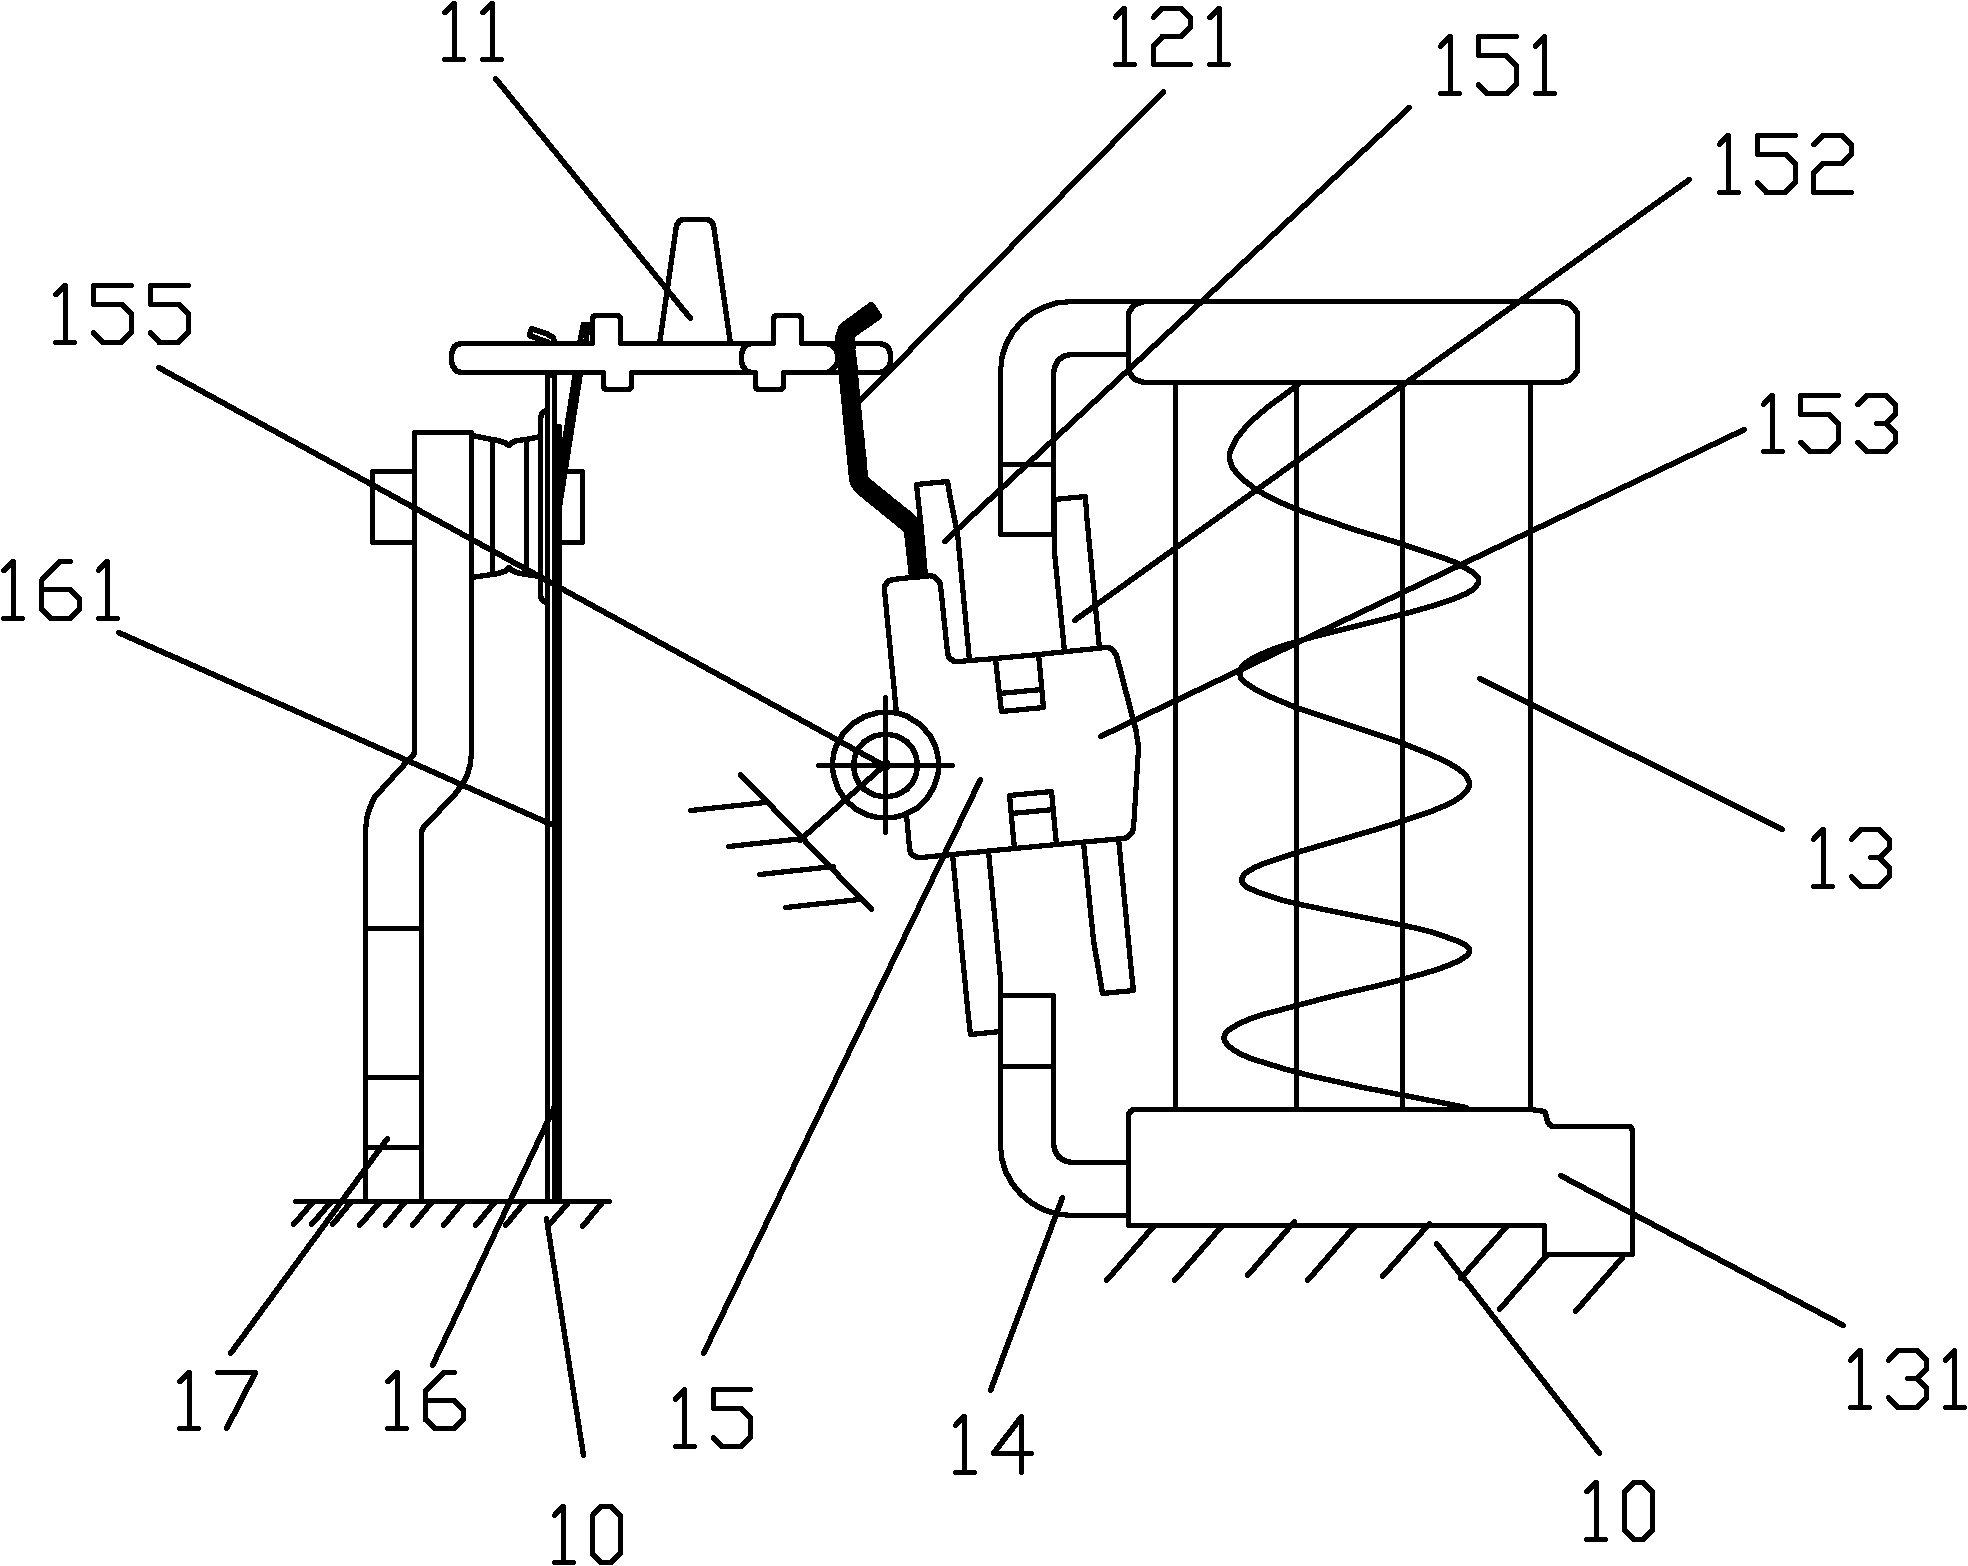 Magnetic latching relay with double flexible pushing connections